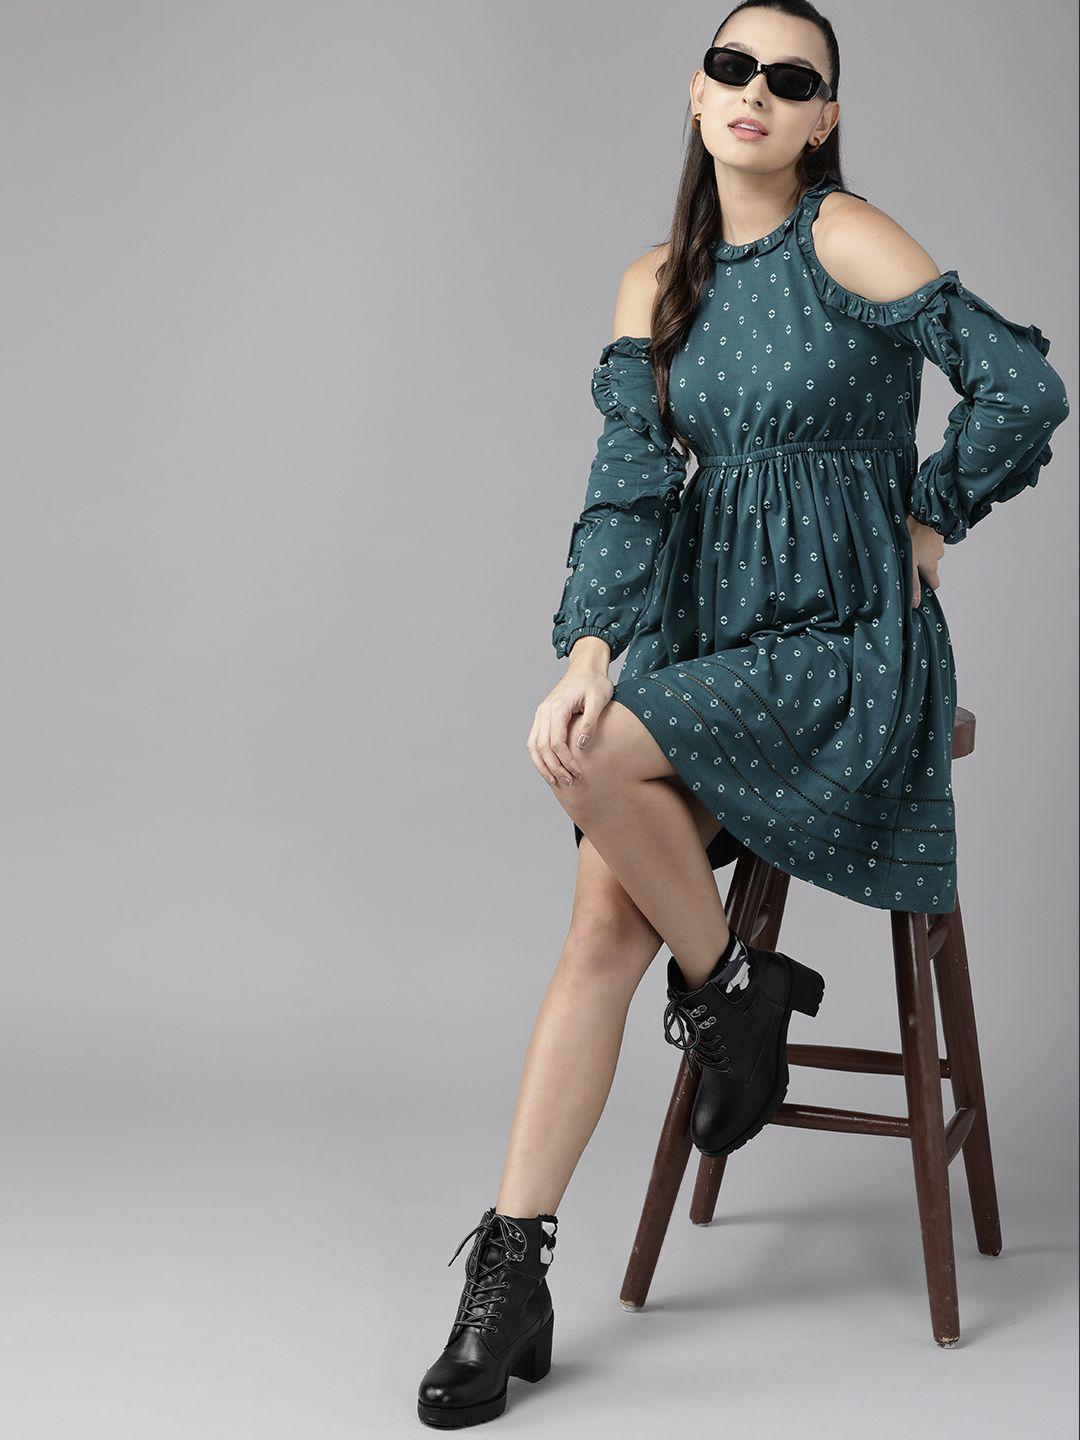 the roadster lifestyle co. cold shoulder ruffled a-line dress